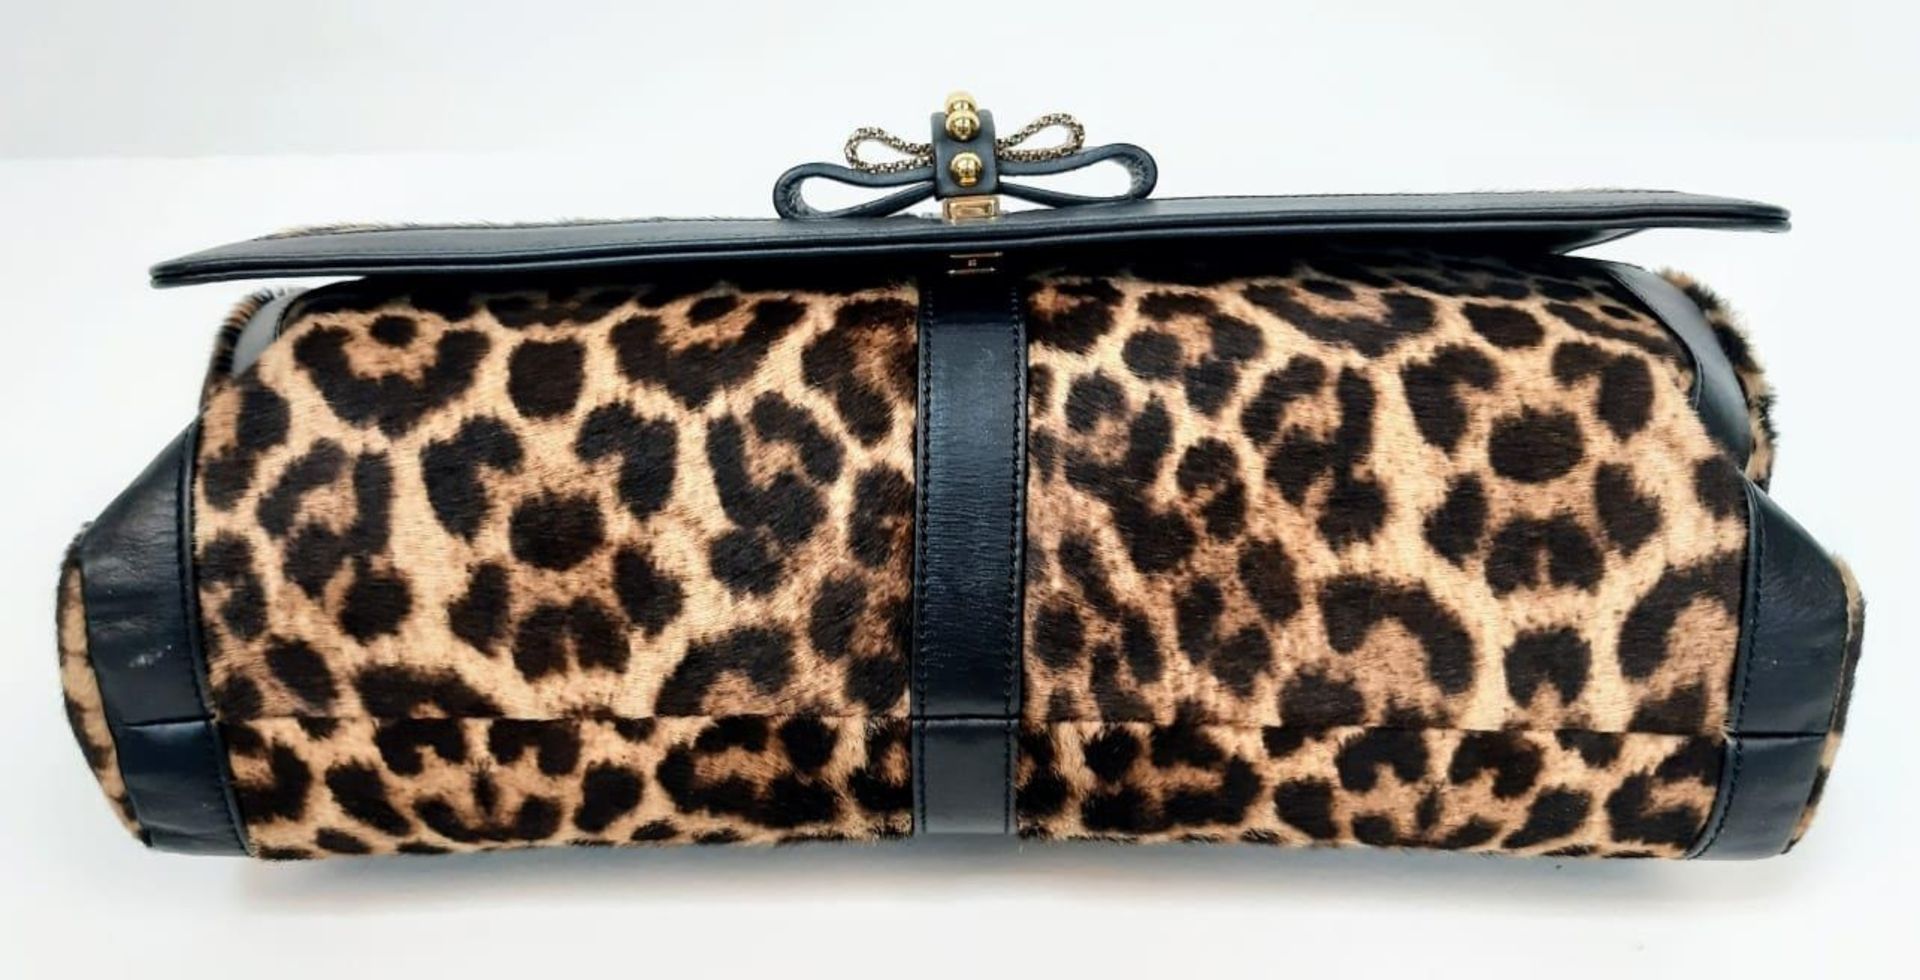 A Christian Louboutin Sweet Charity Leather and Leopard Print Pony Hair Shoulder Bag. Gold tone - Image 5 of 6